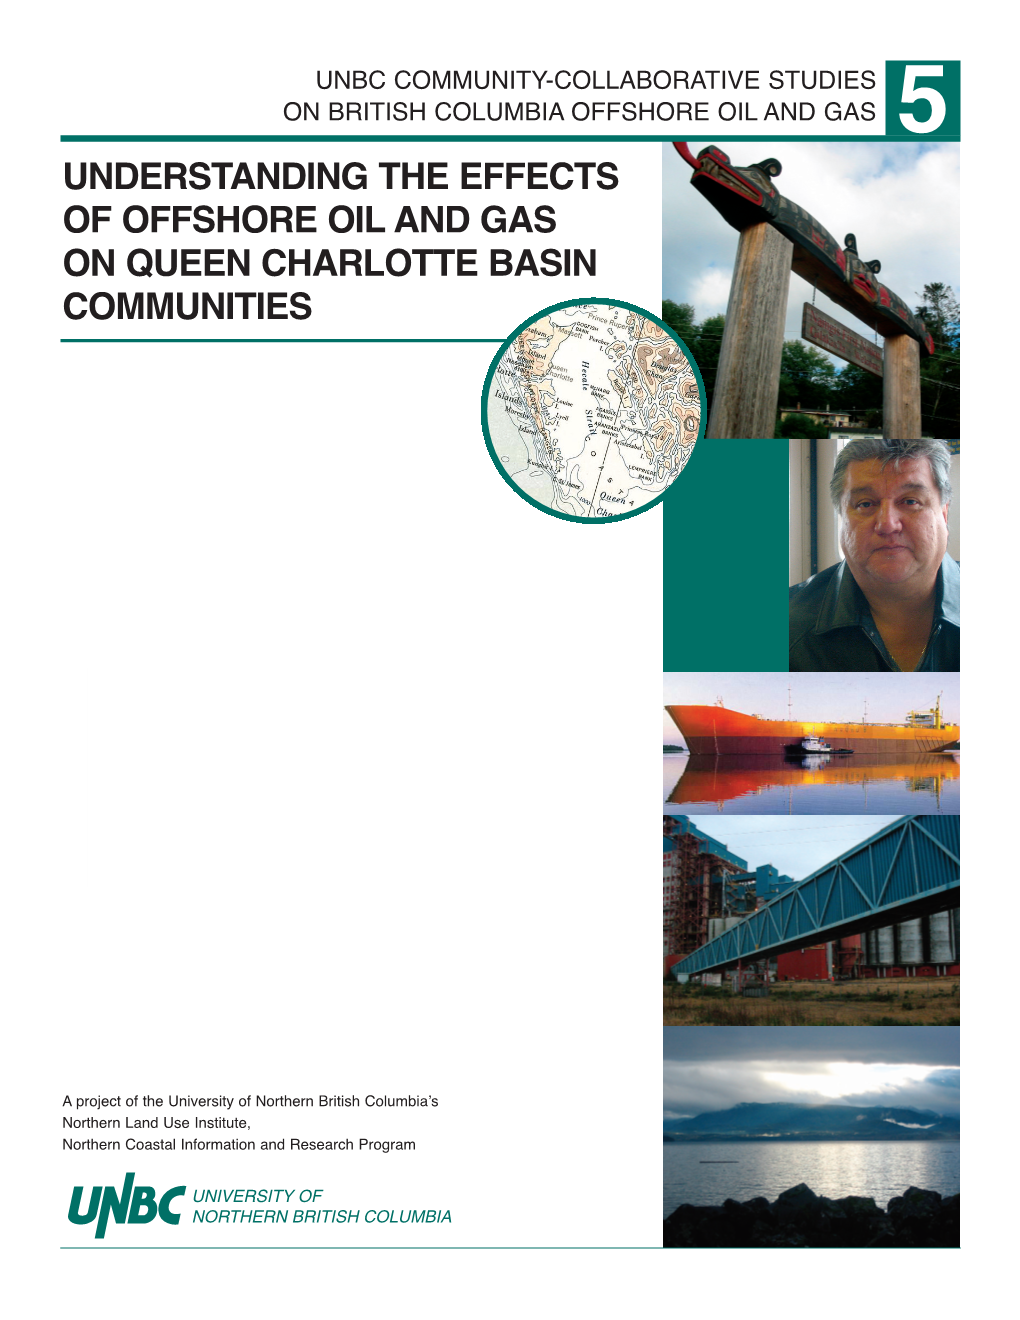 Understanding the Effects of Offshore Oil and Gas on Queen Charlotte Basin Communities